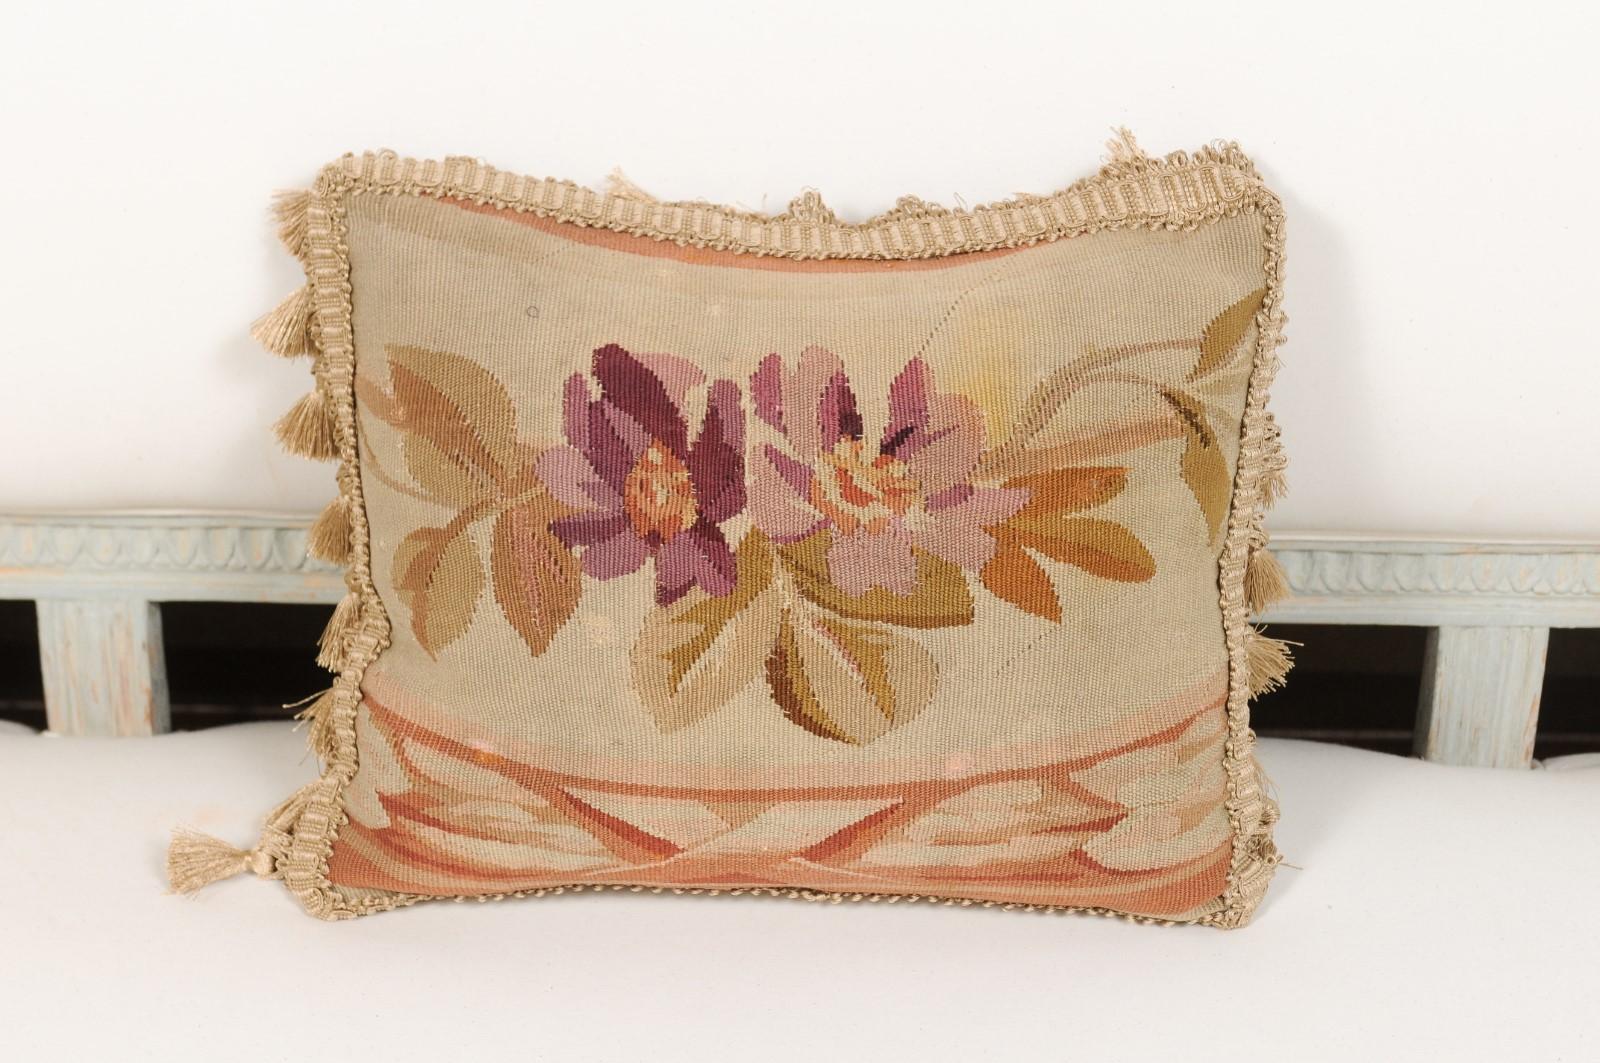 A French 19th century Aubusson tapestry pillow, with floral décor and tassels. Born during the 19th century in the Aubusson tapestry manufacture located in central France, this pillow features two delicate purple flowers, perfectly contrasted with